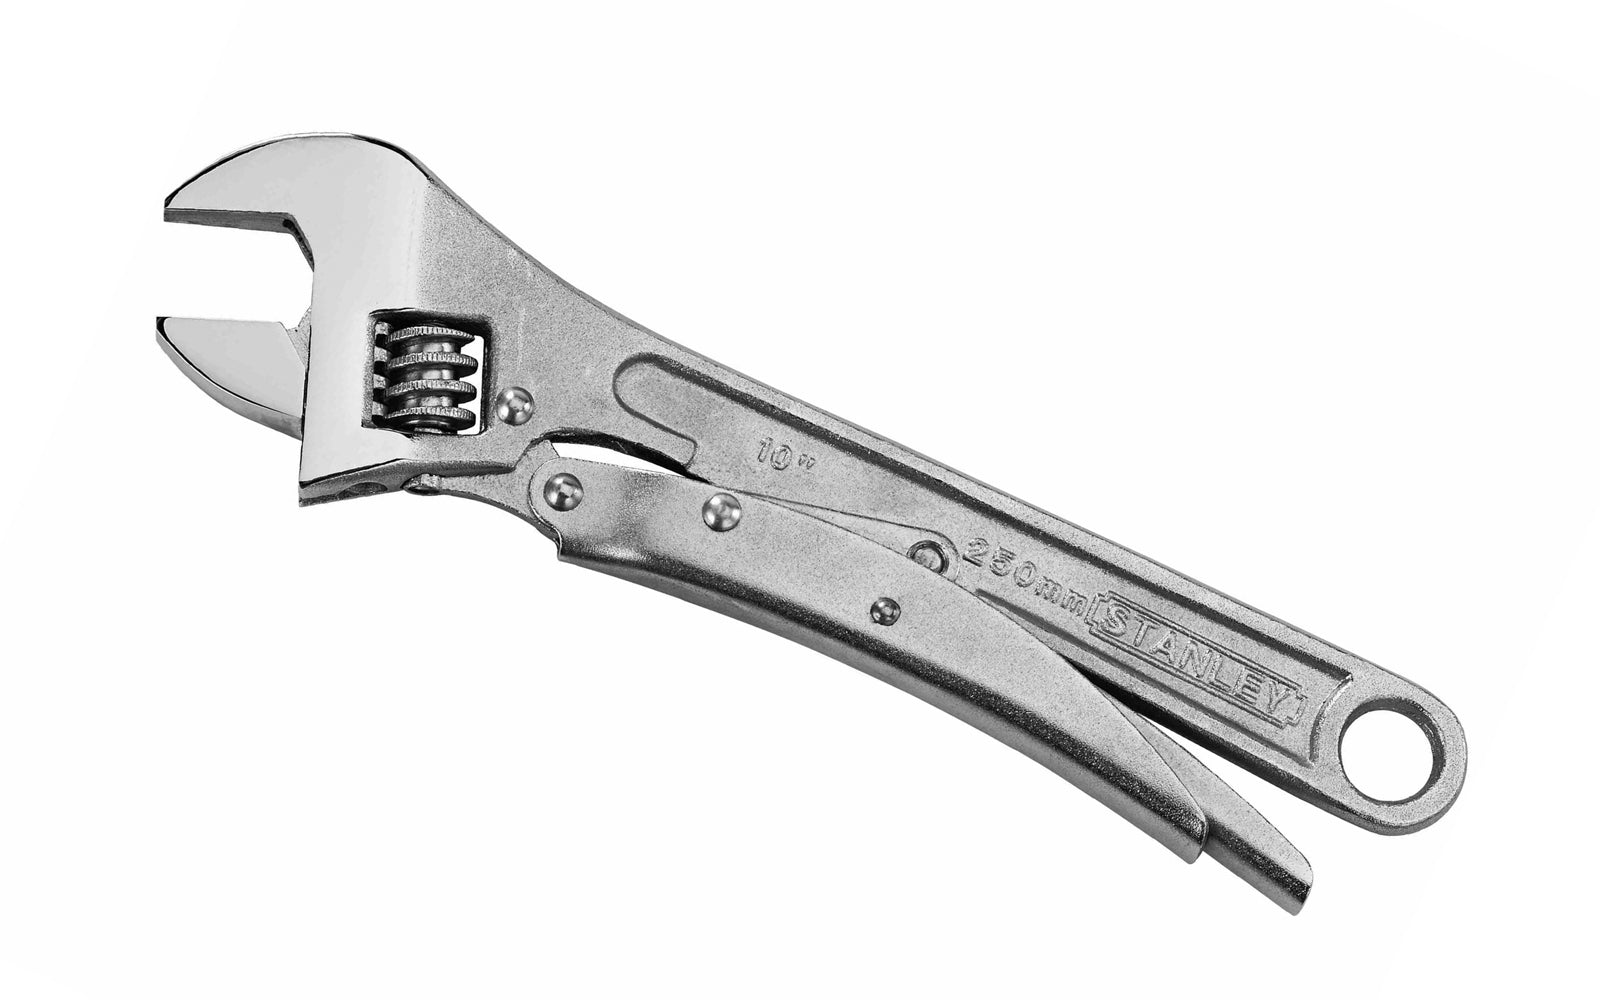 Stanley 10" Locking Adjustable Wrench ~ 85-610 - Traditional adjustable wrench & locking pliers - ANSI specifications ~ Anti-slip mechanism locks the movable jaw & tightly grips onto fastener - Locking Handle